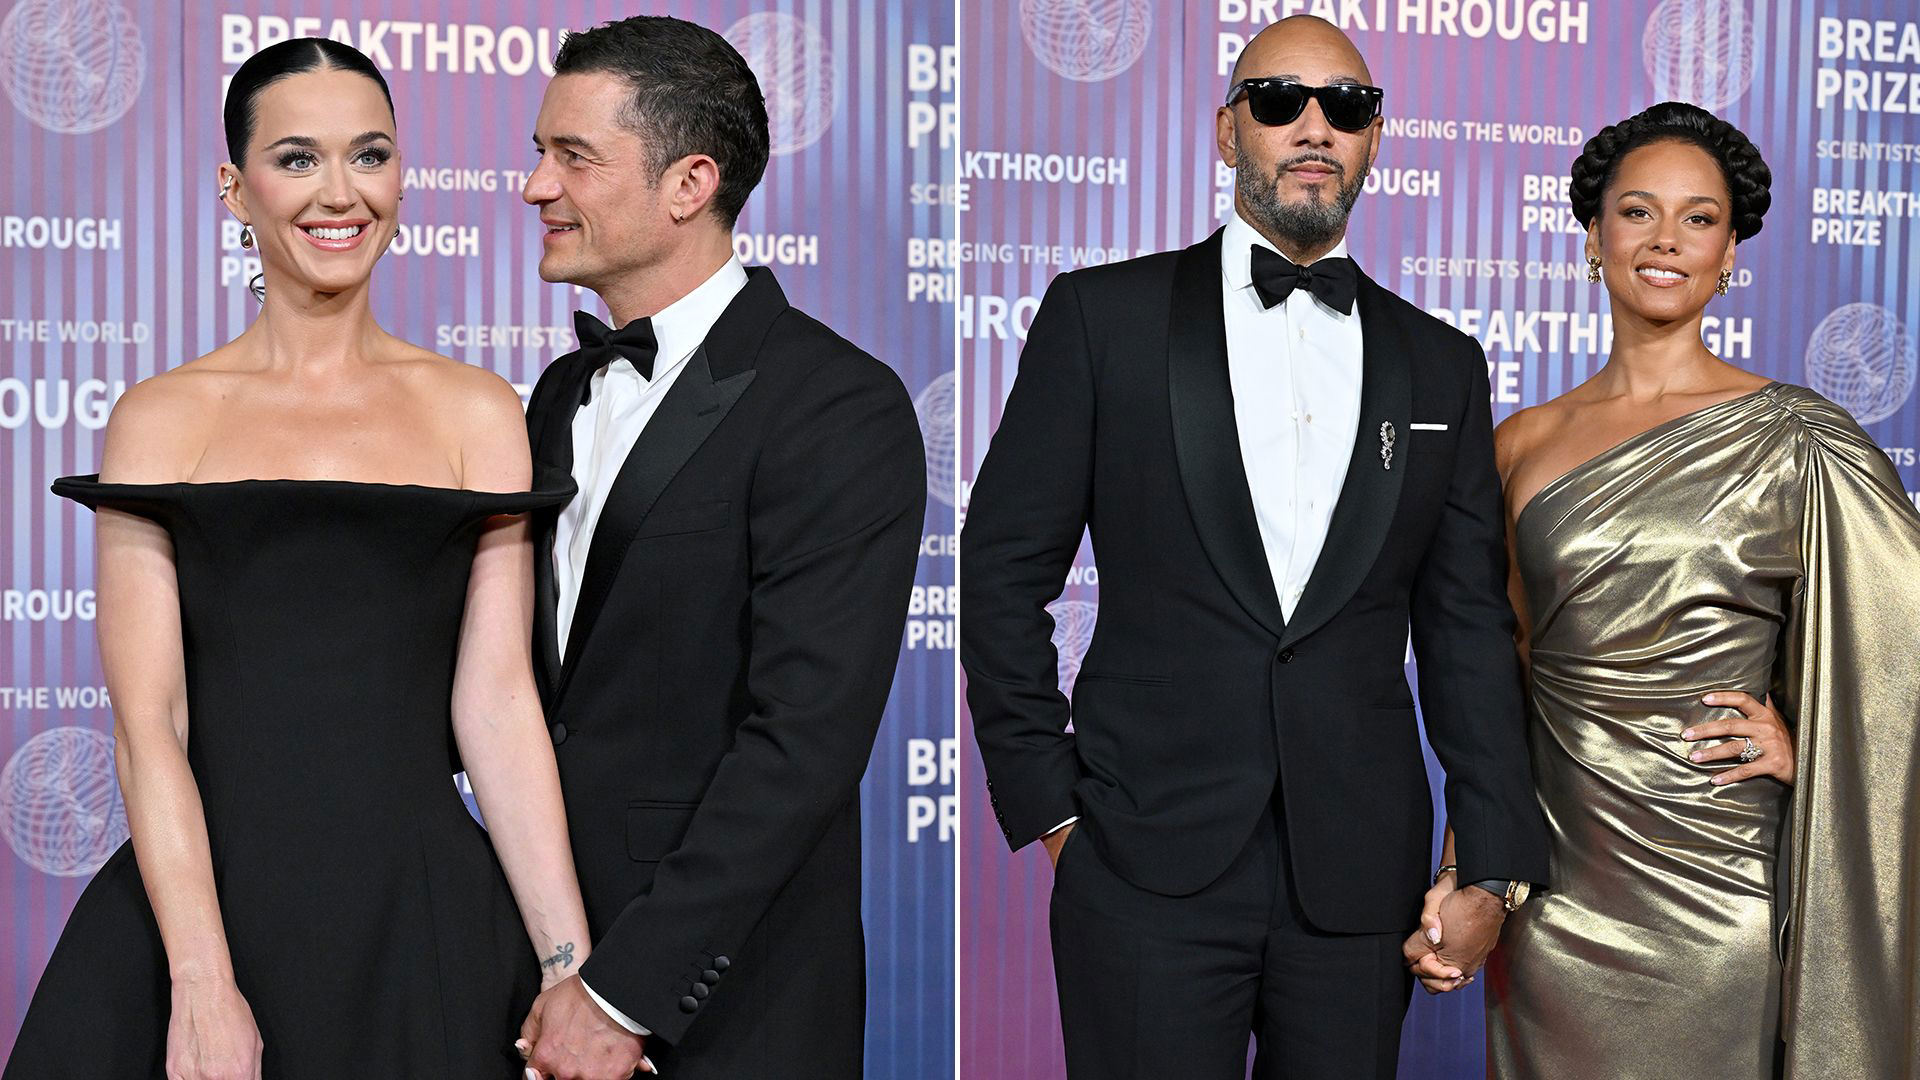 Cutest couples at the Breakthrough Prize ceremony From Katy Perry and